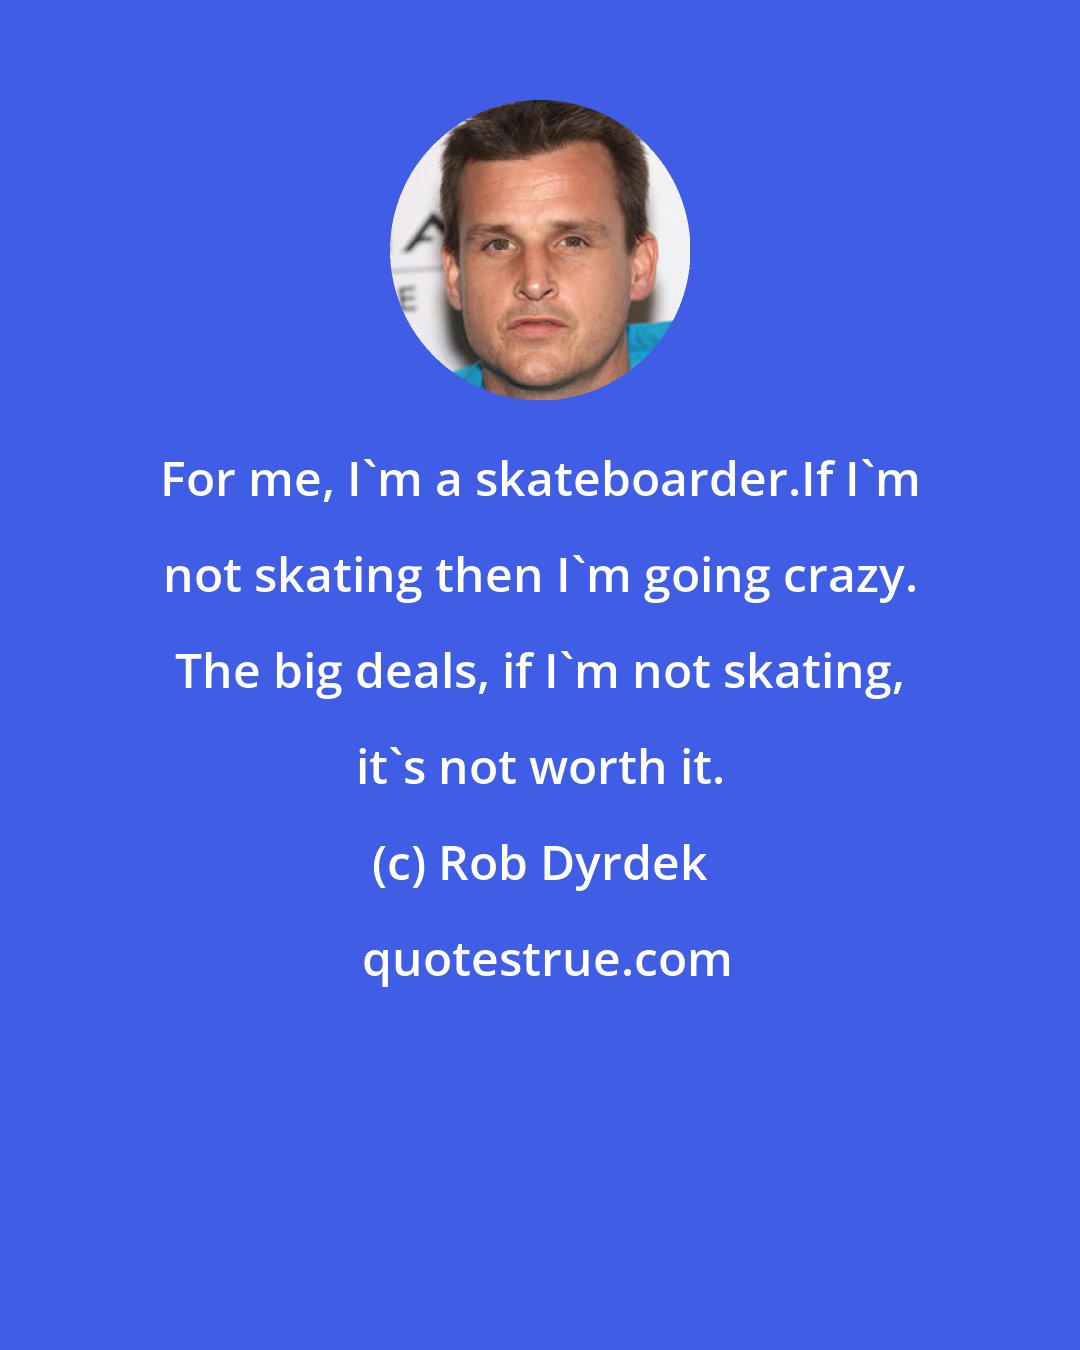 Rob Dyrdek: For me, I'm a skateboarder.If I'm not skating then I'm going crazy. The big deals, if I'm not skating, it's not worth it.